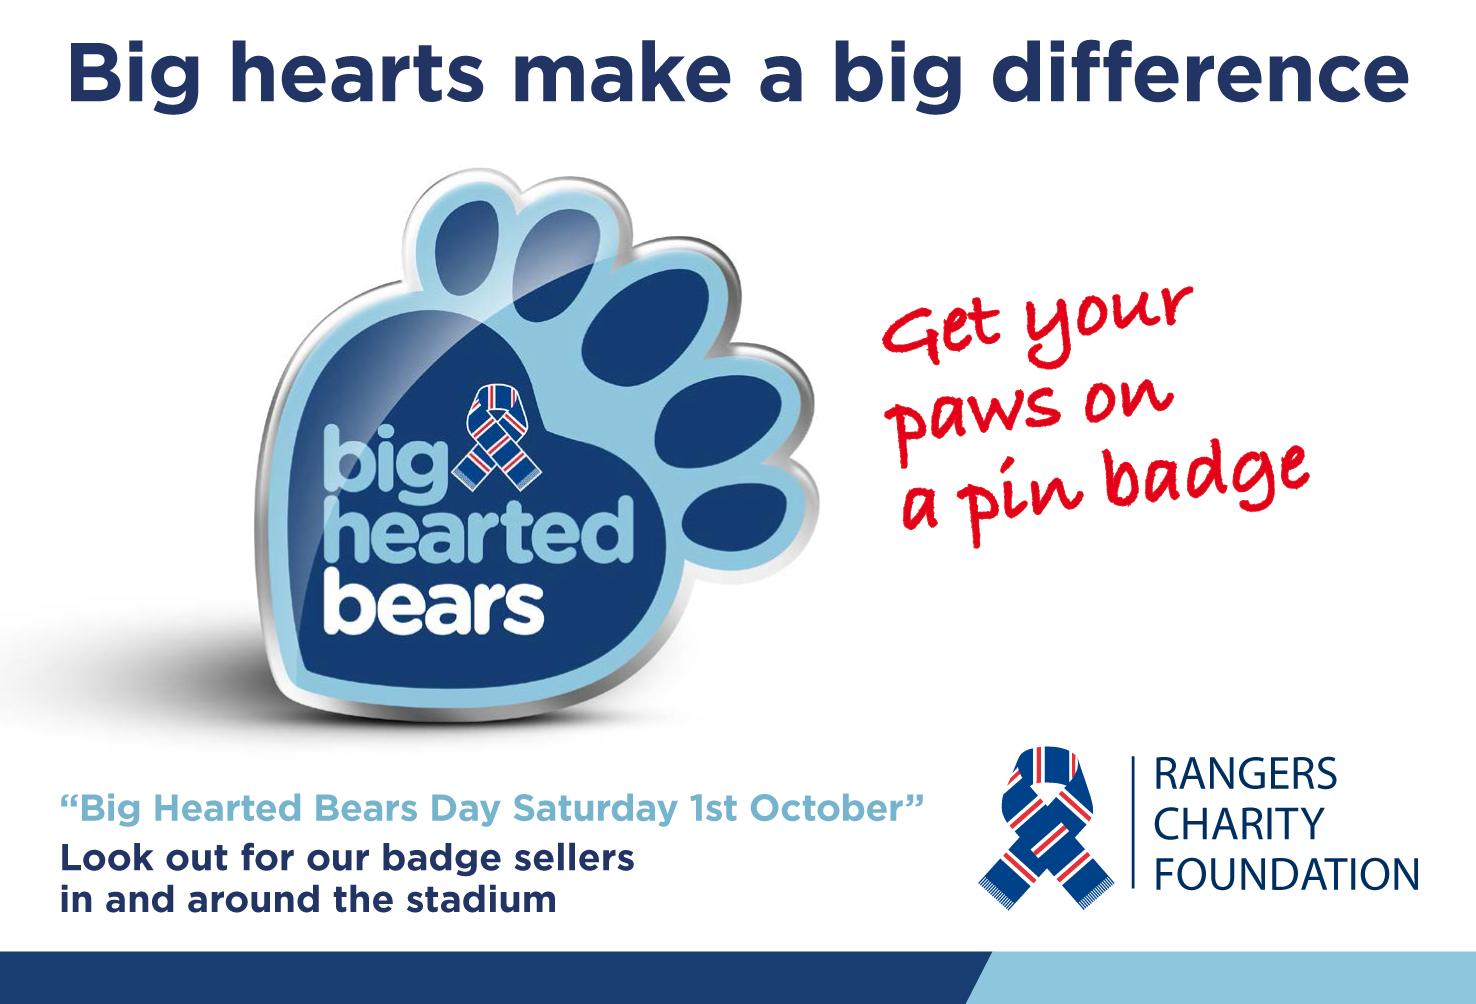 Image of advert for Big Hearted Bears